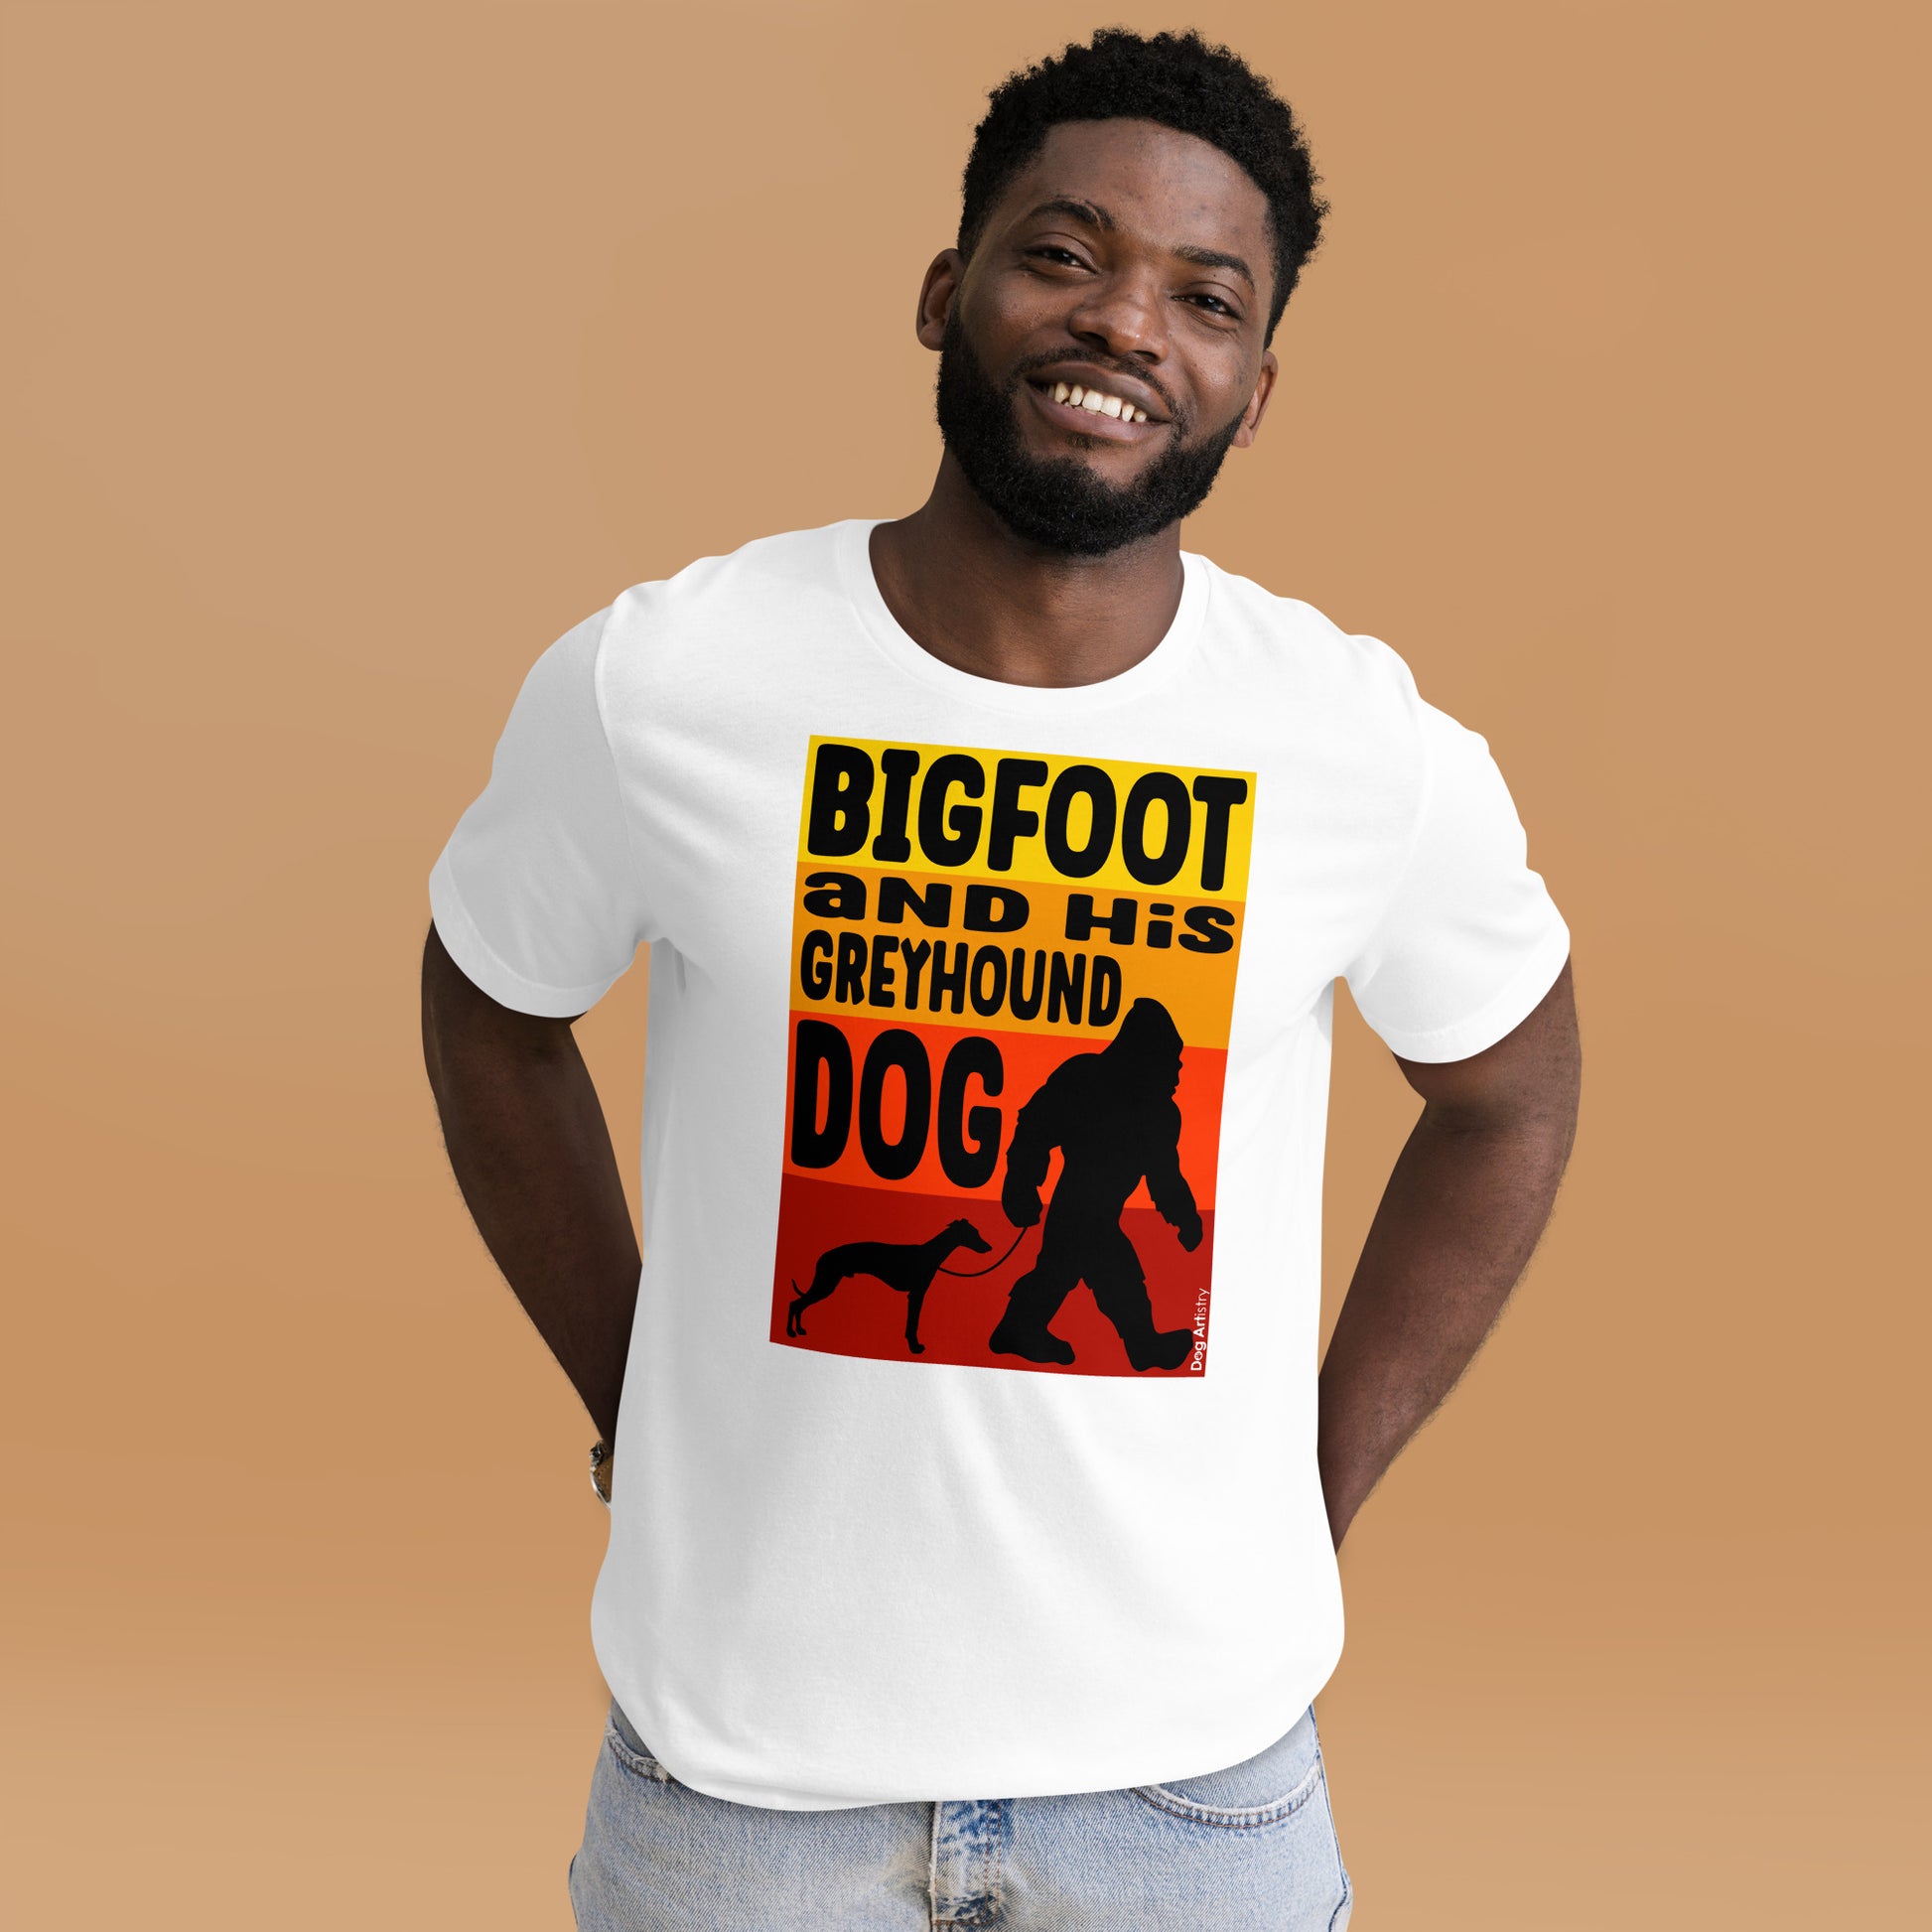 Bigfoot and his Greyhound unisex white t-shirt by Dog Artistry.